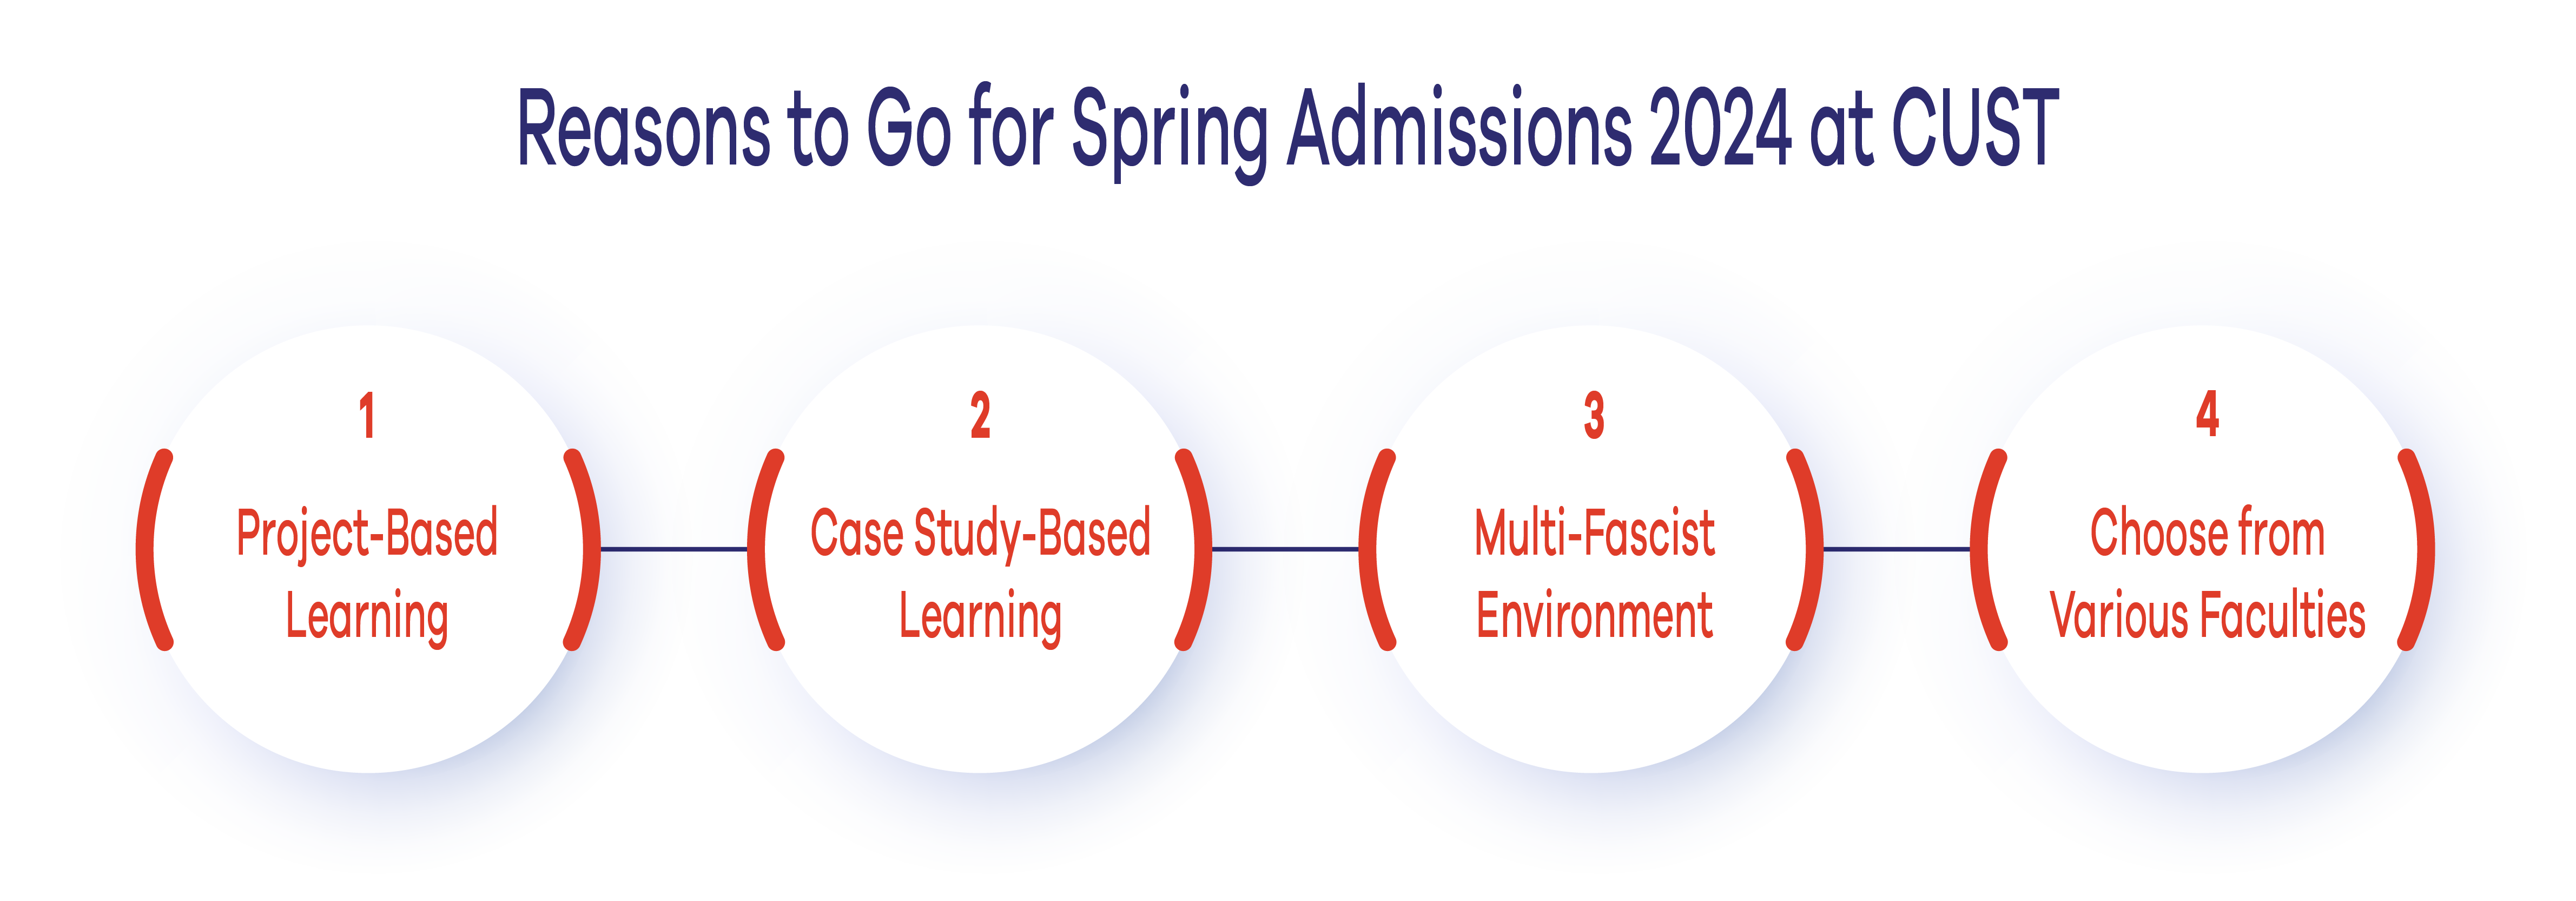 Reasons to Go for Spring Admissions 2024 at CUST 